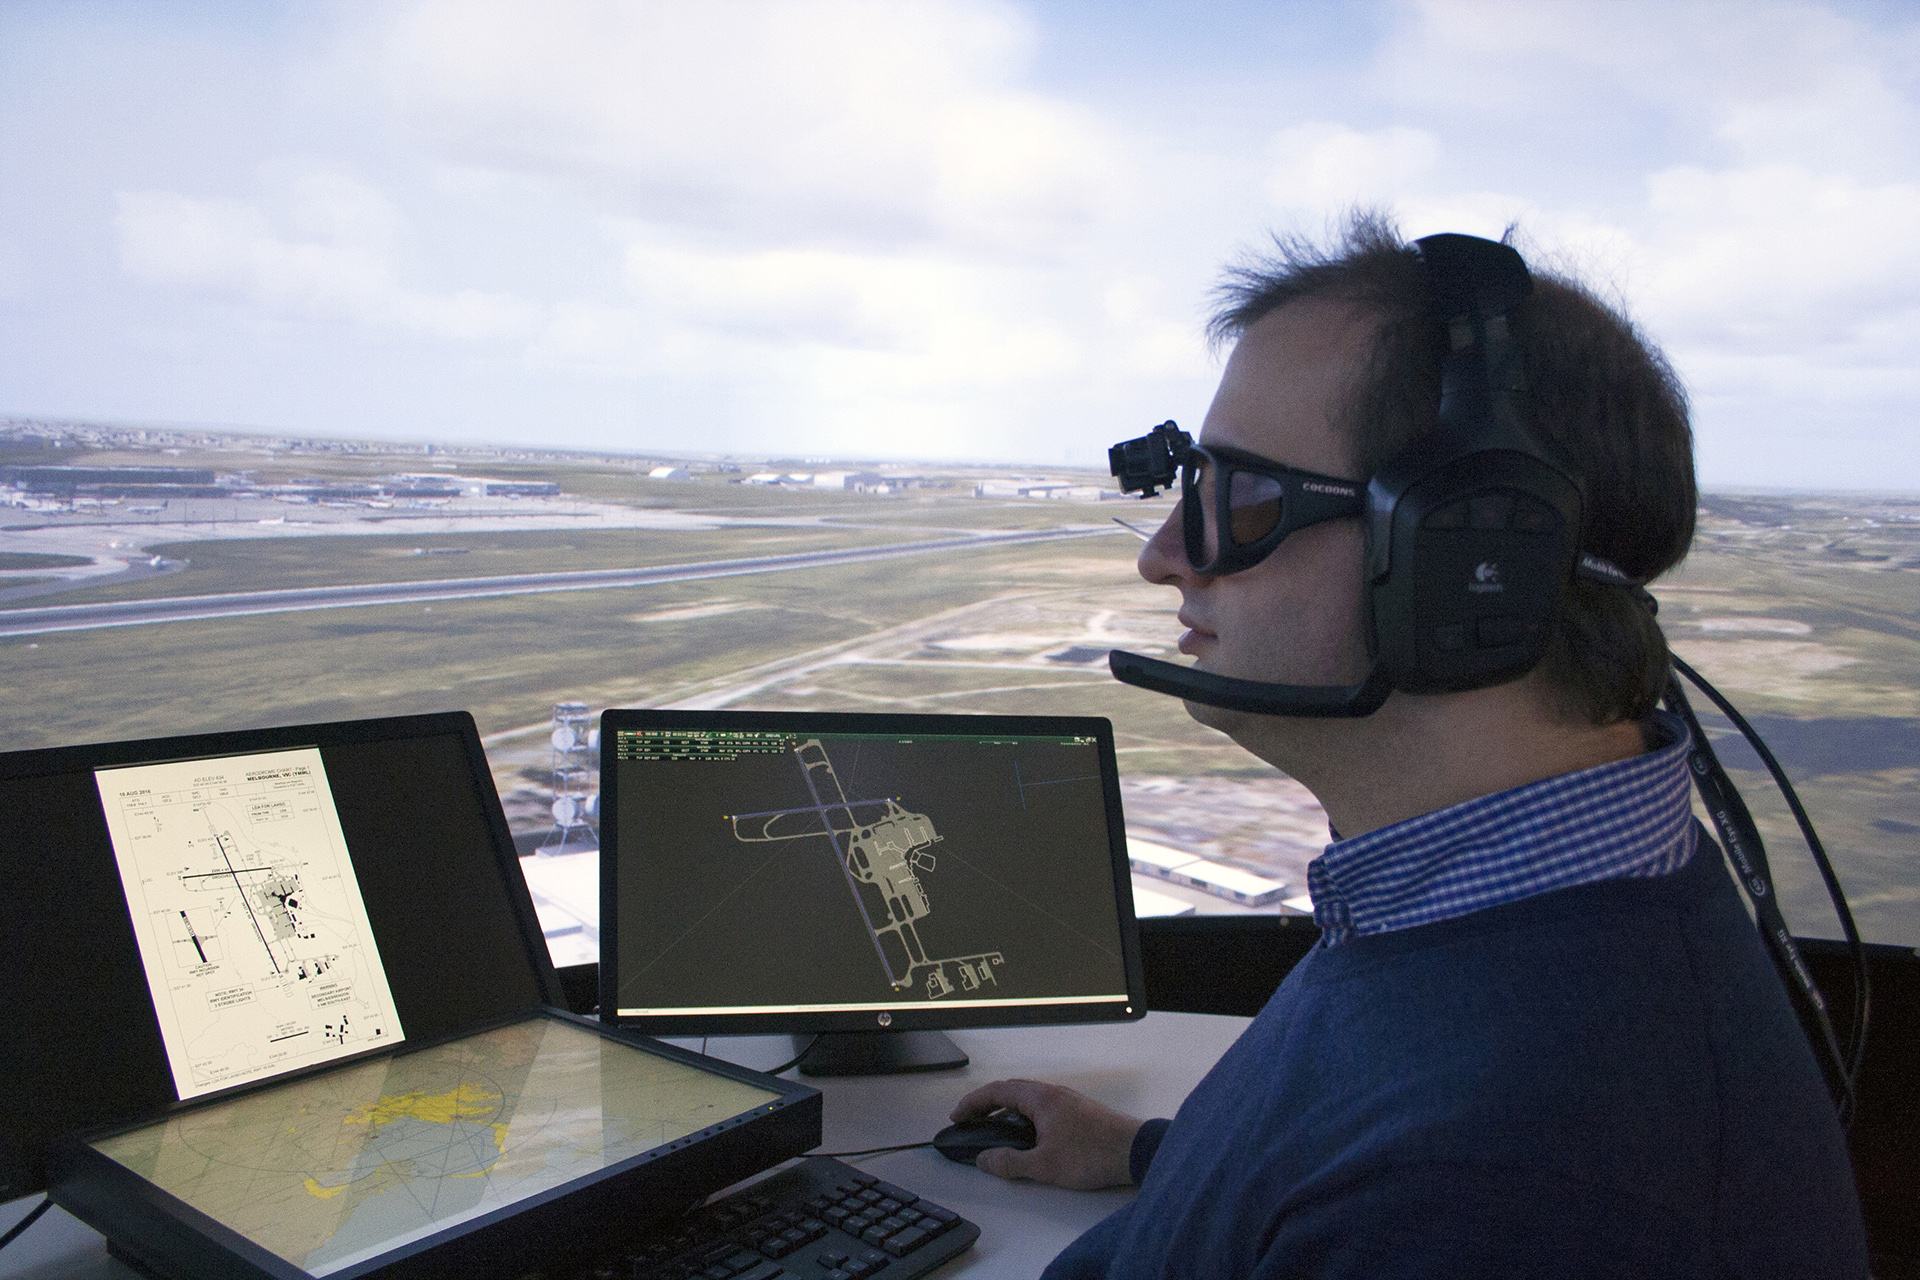 Researcher in the air traffic control simulator wearing eye-tracking glasses.